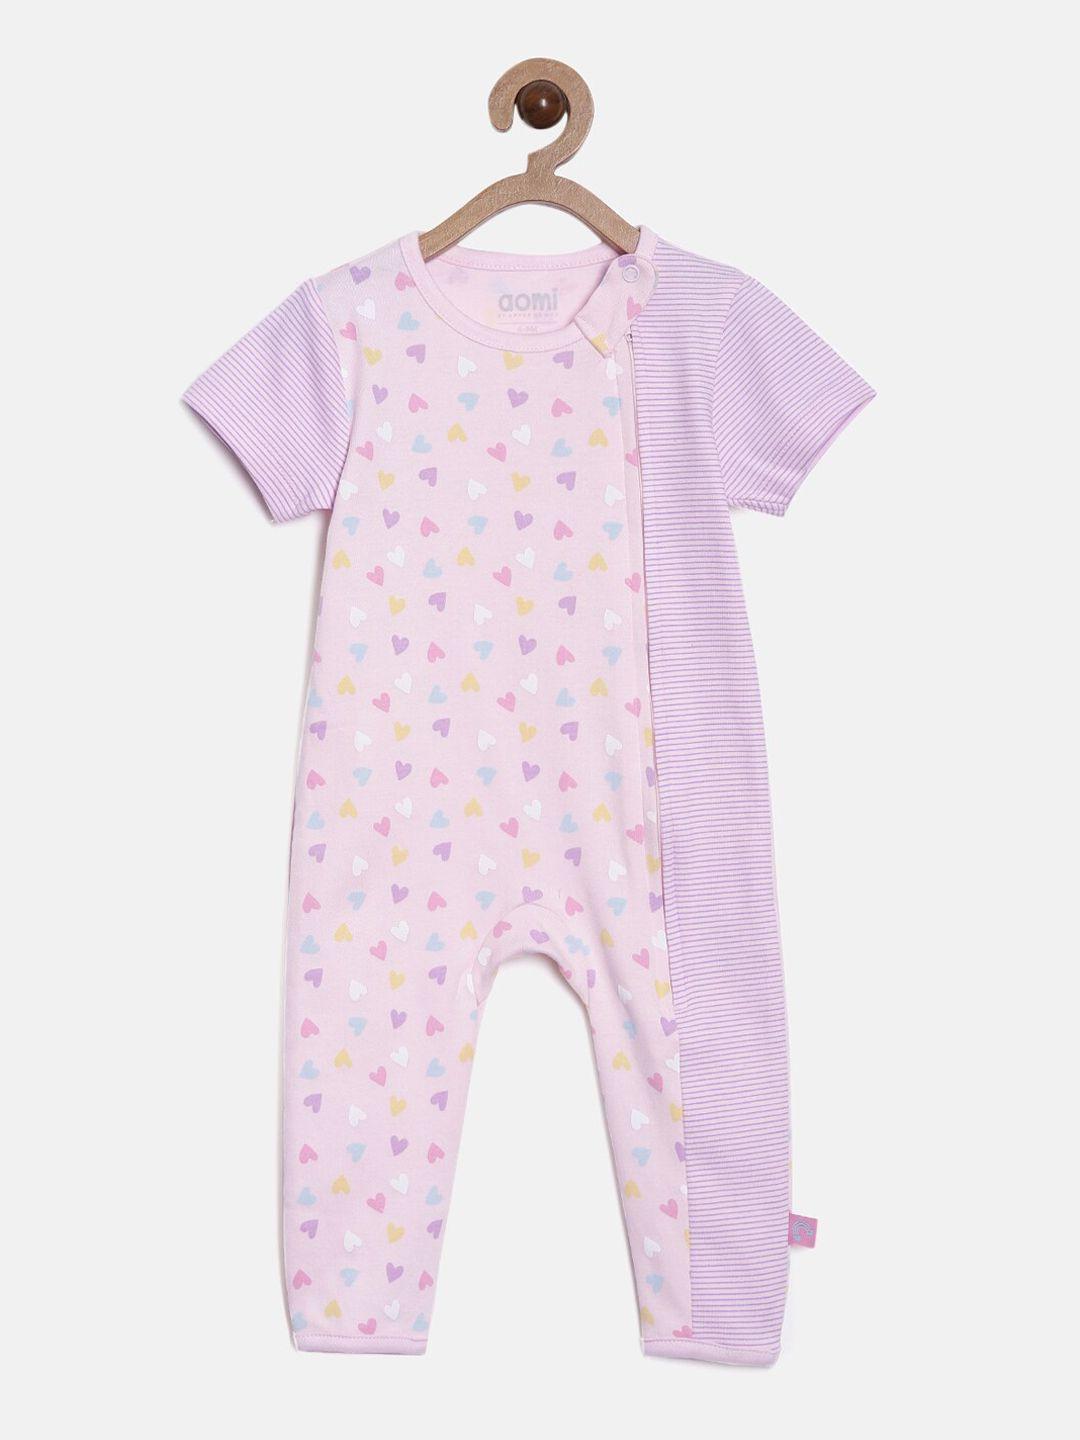 aomi infant lavender heart printed striped cotton rompers